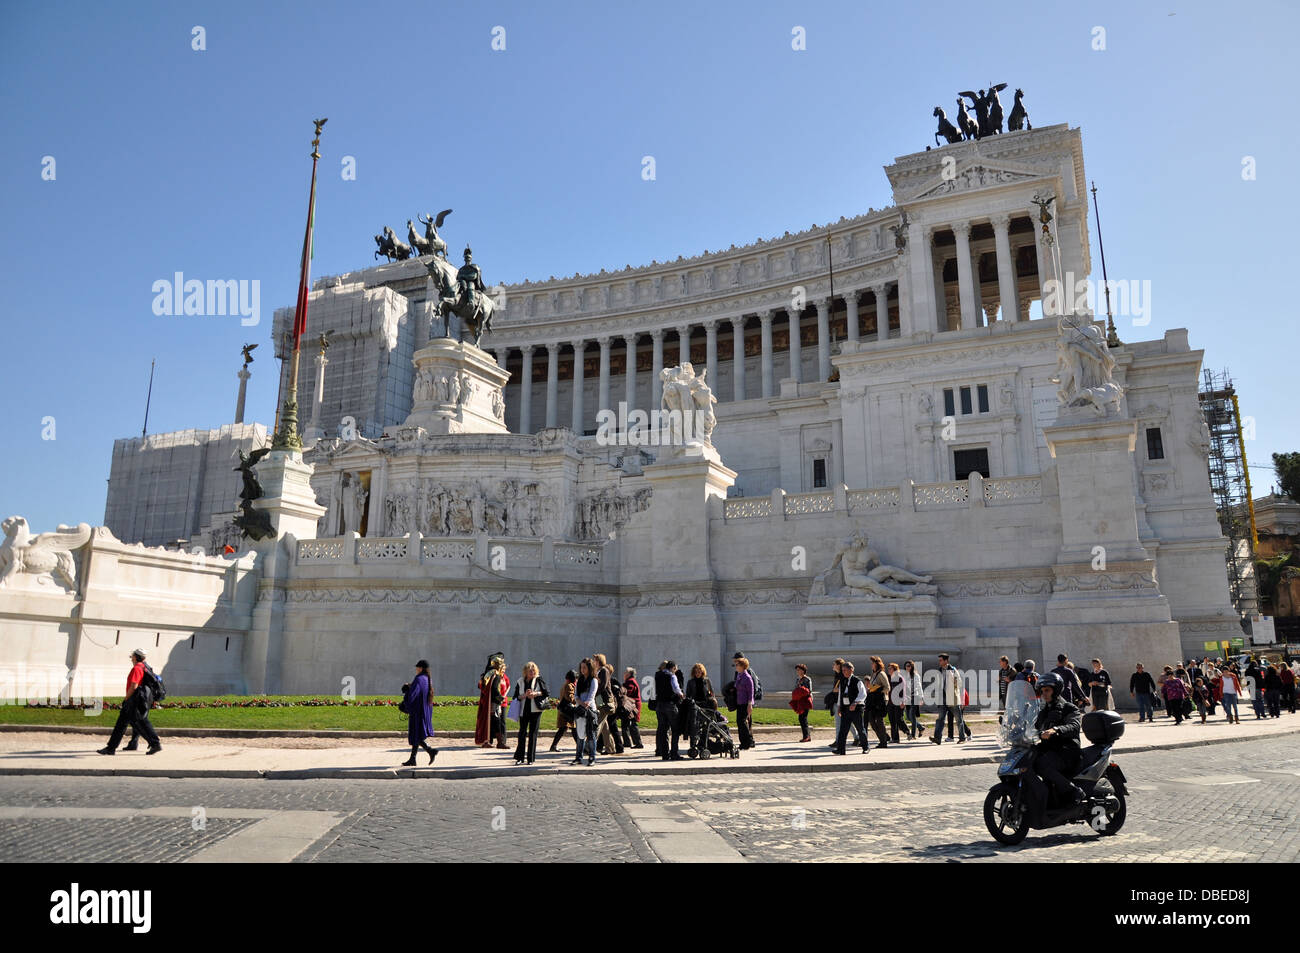 National Monument to Victor Emmanuel II. Stock Photo